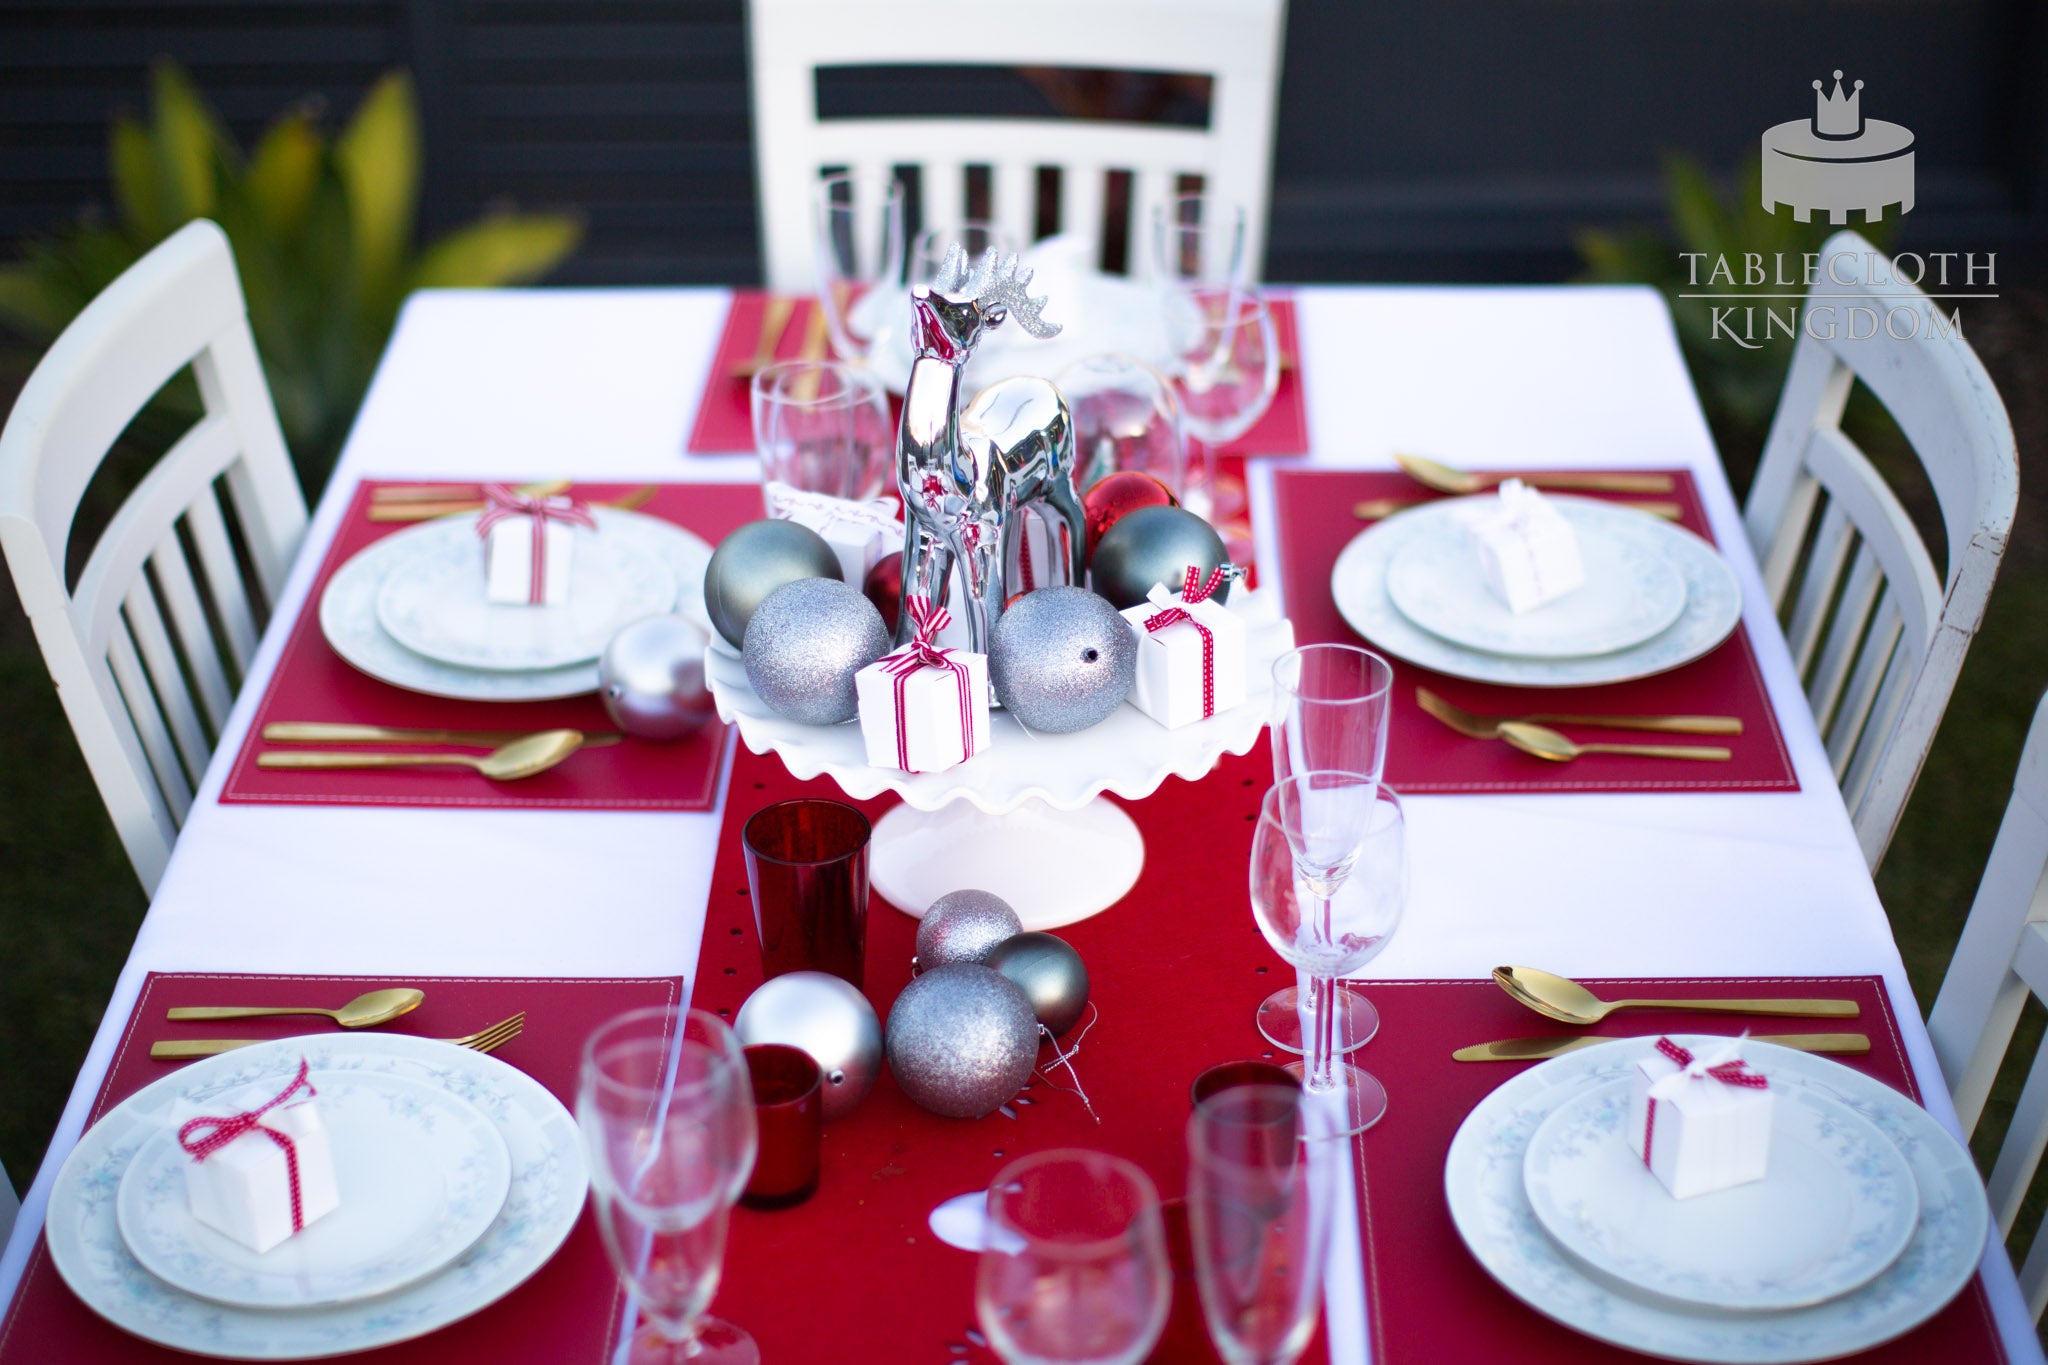 Deck The Halls! It’s a Christmas table settings!_1